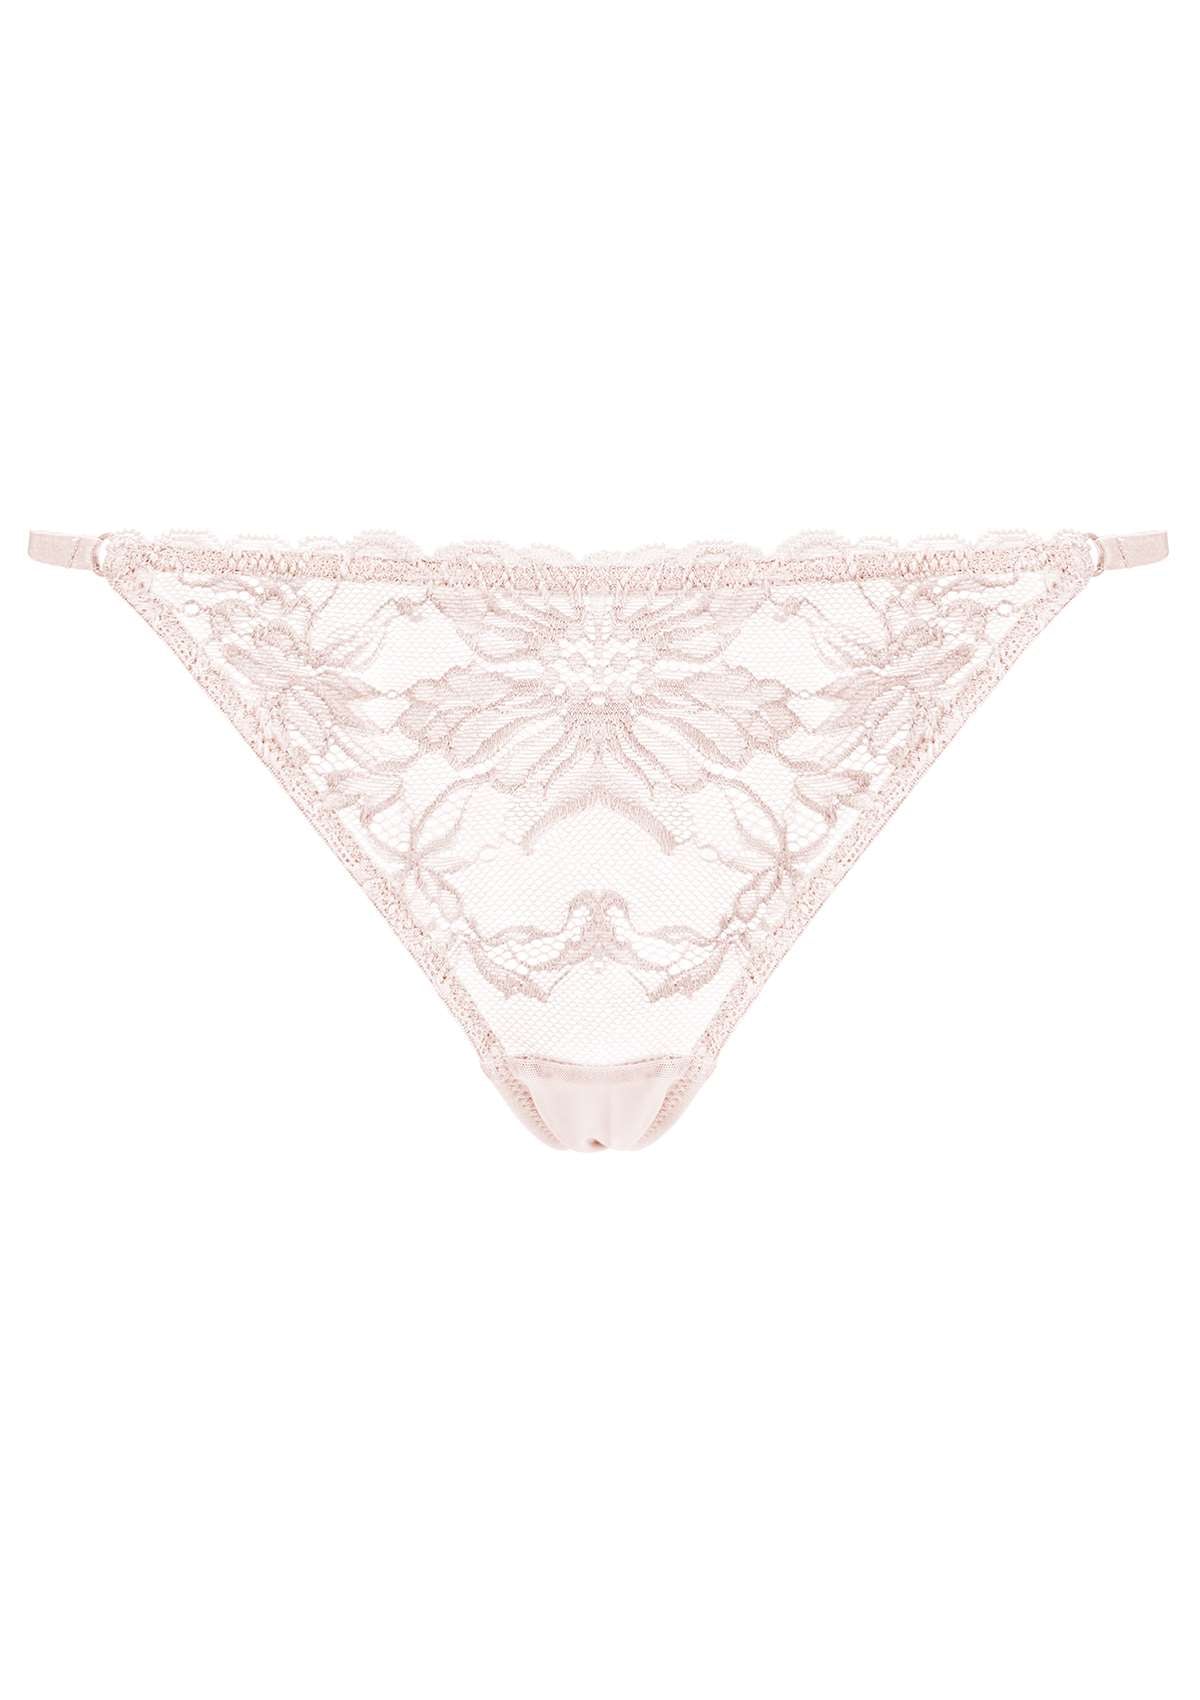 HSIA Pretty In Petals: 3-Pack Of Sexy Floral Chic Lace String Thongs - XL / Light Coral+Dusty Peach+Pewter Blue